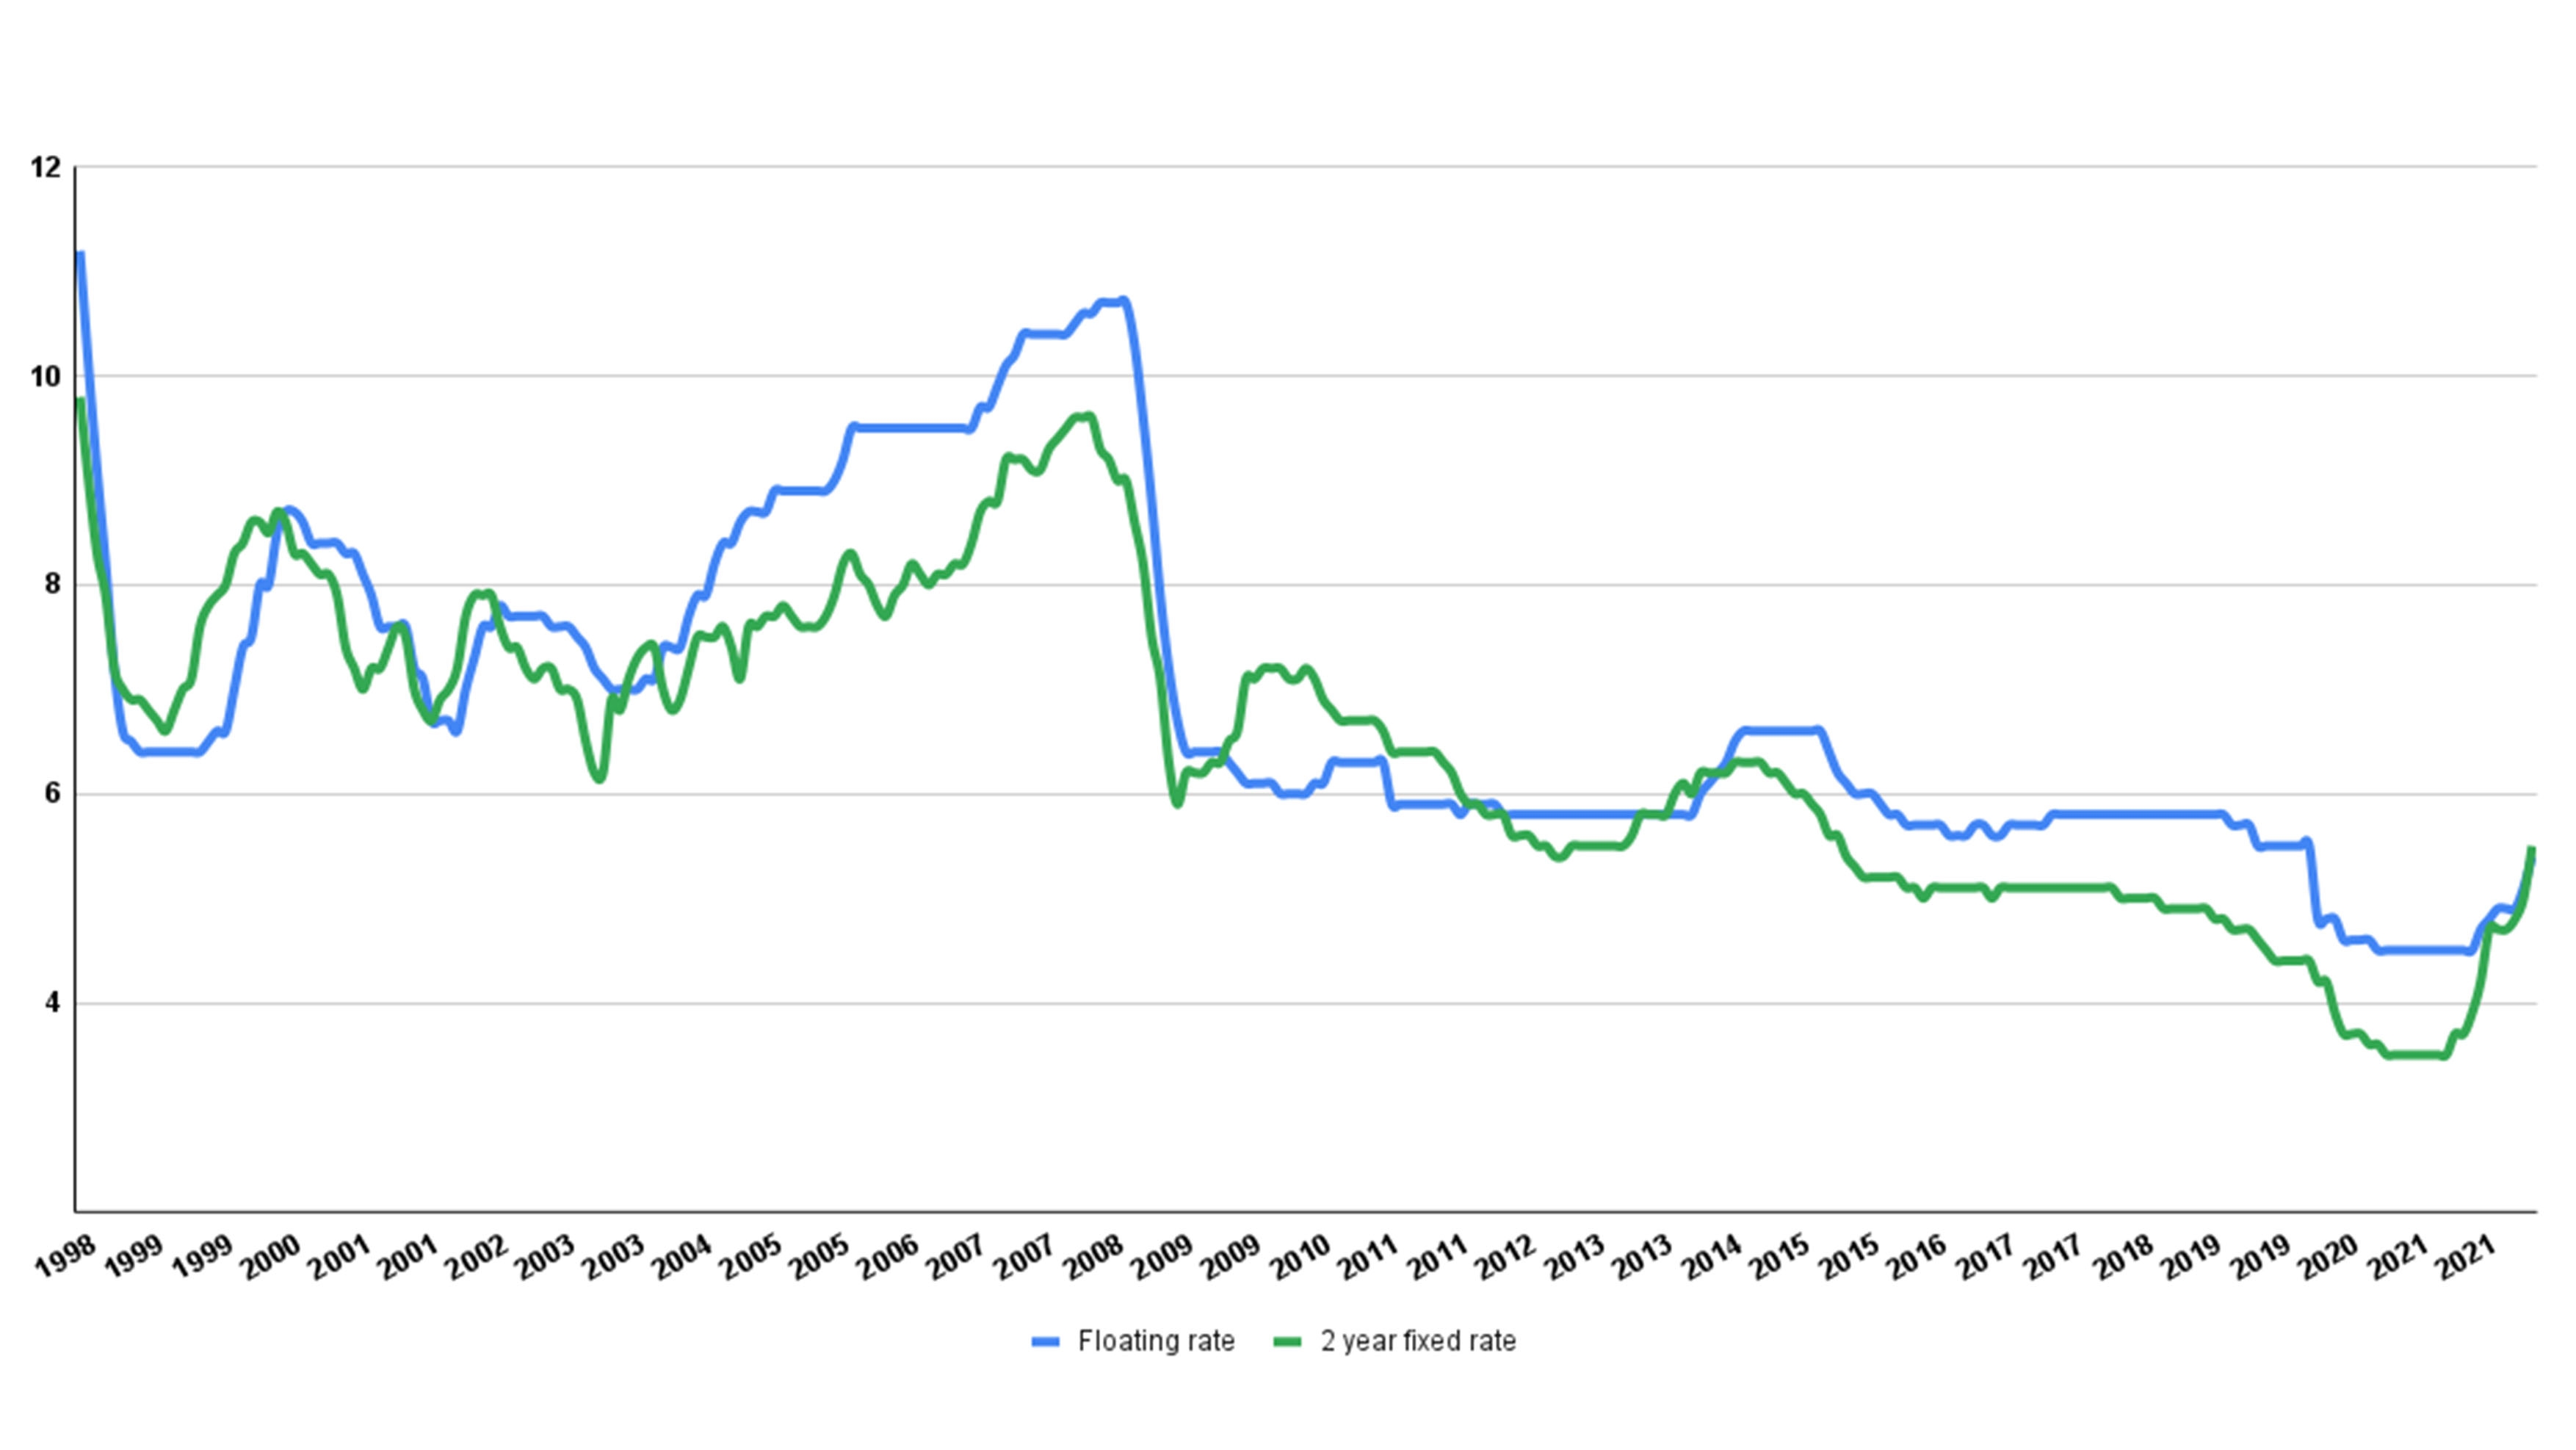 Graph showing mortgage rates over time